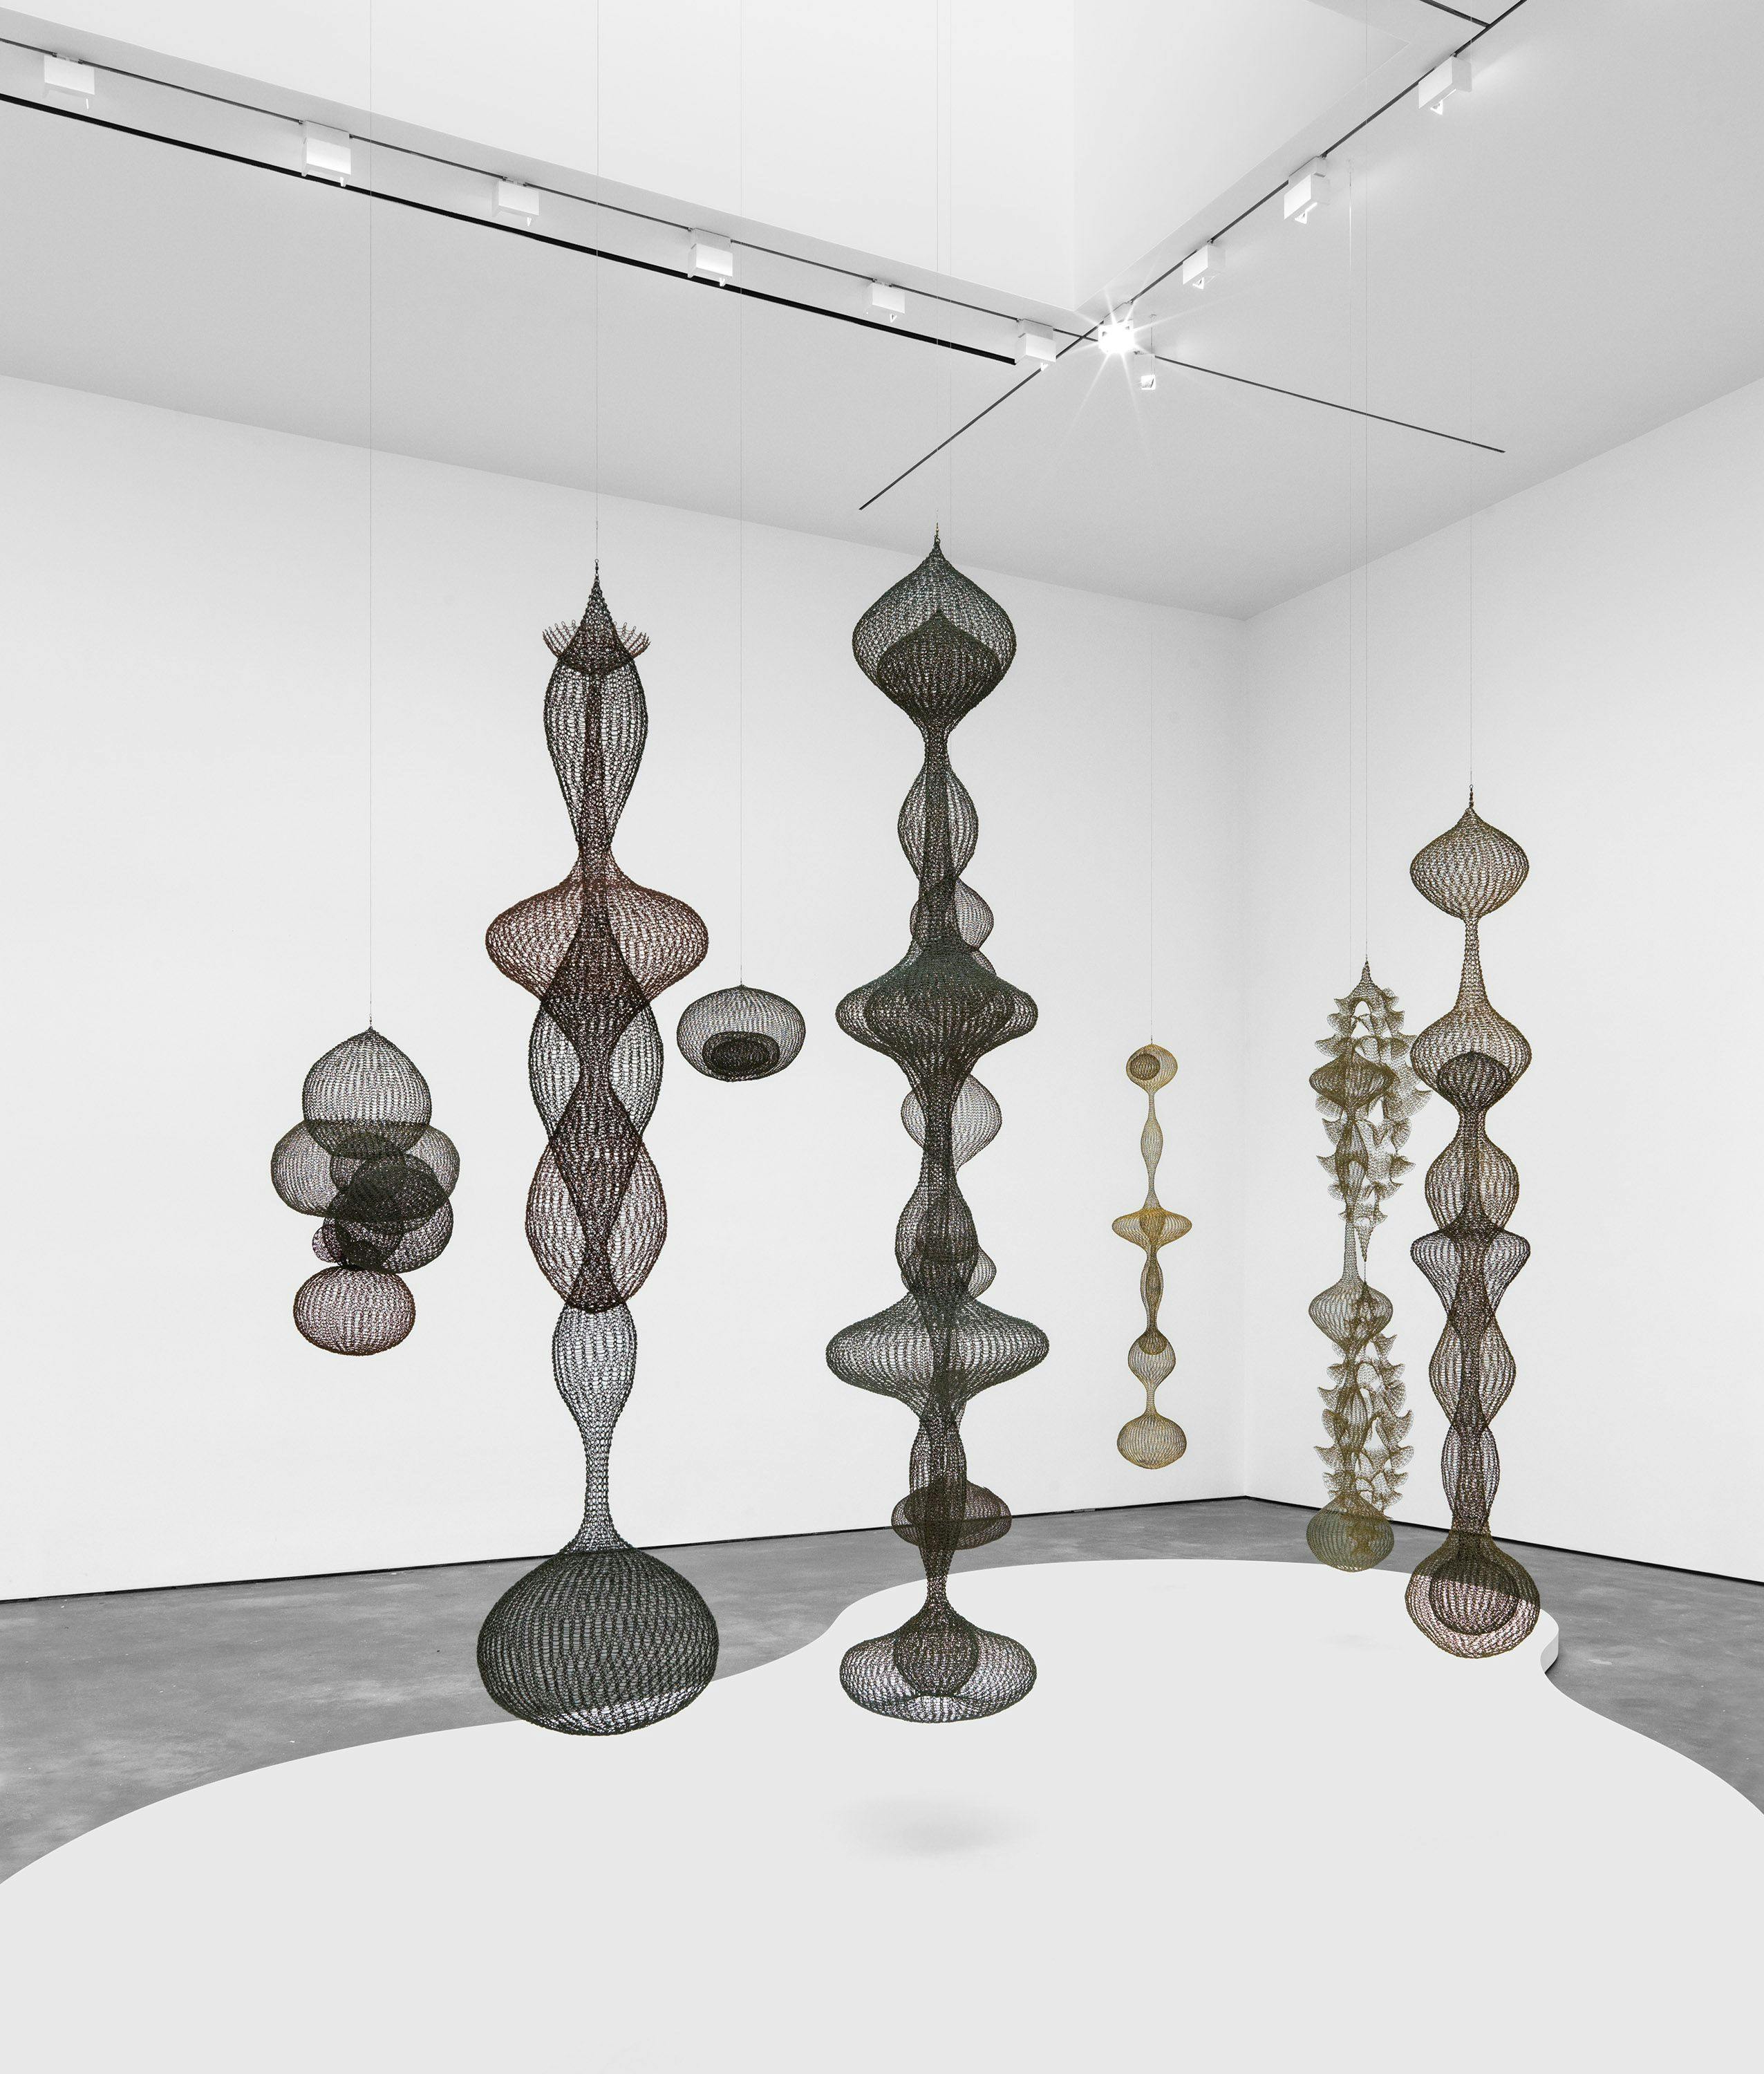 Installation view of the exhibition,  Ruth Asawa: All Is Possible, at David Zwirner in New York, dated 2021.